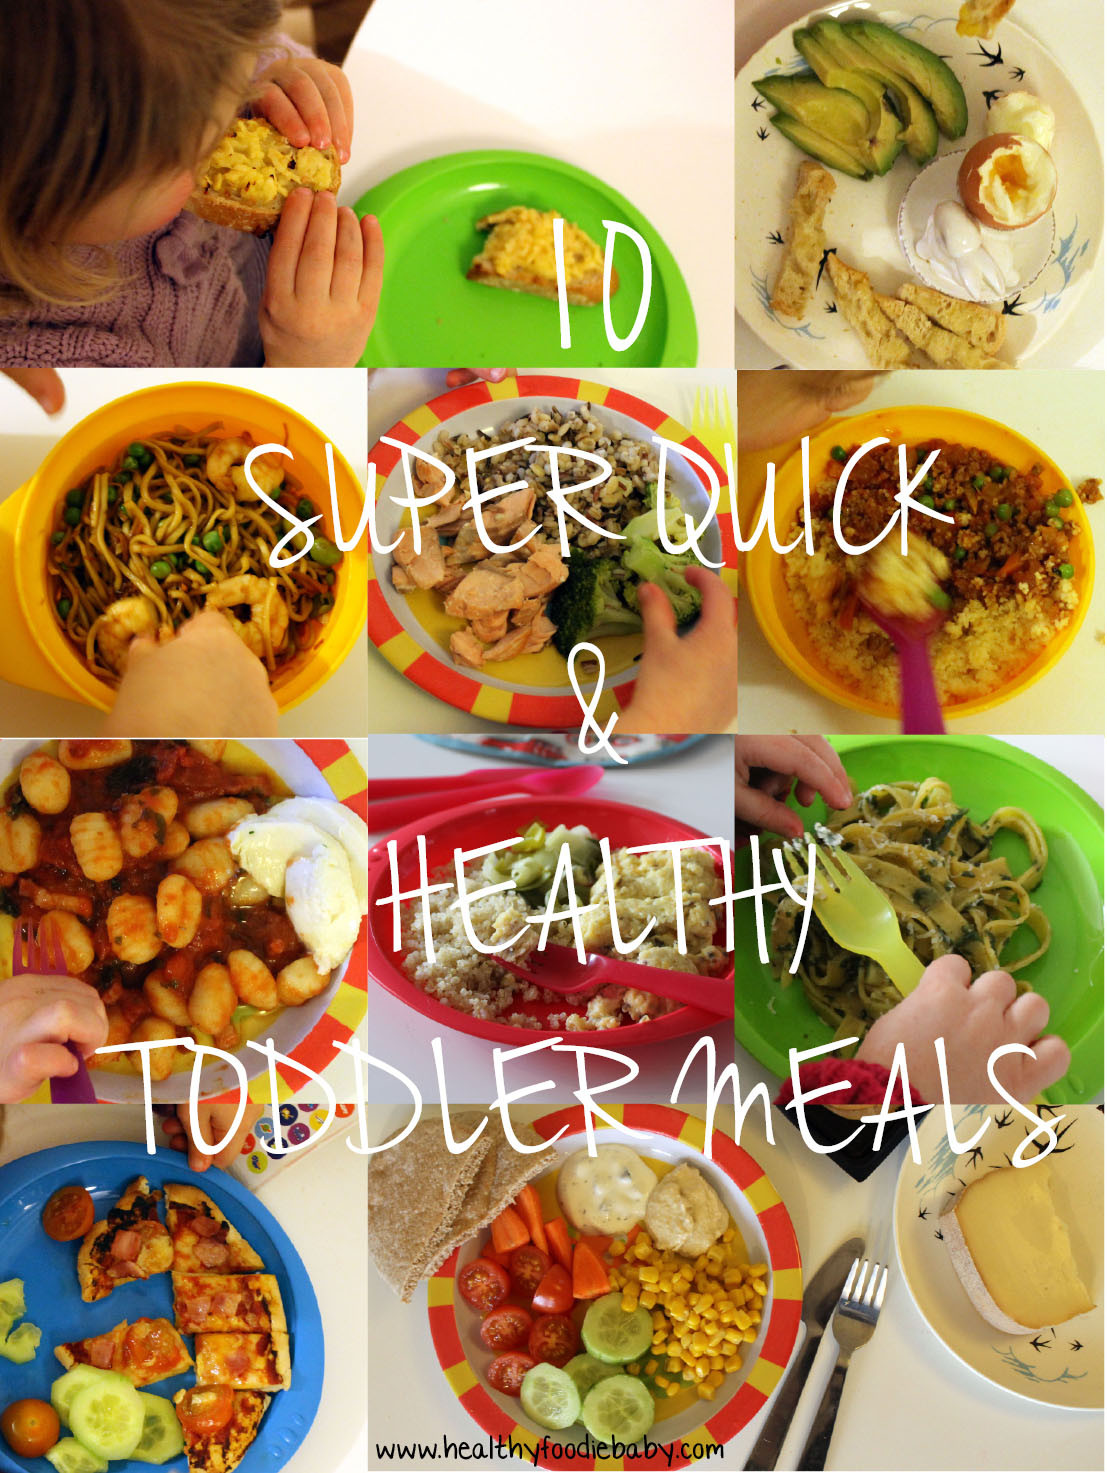 Toddler Dinner Ideas
 10 Super Quick & Healthy Toddler Meals – Healthyfoo baby